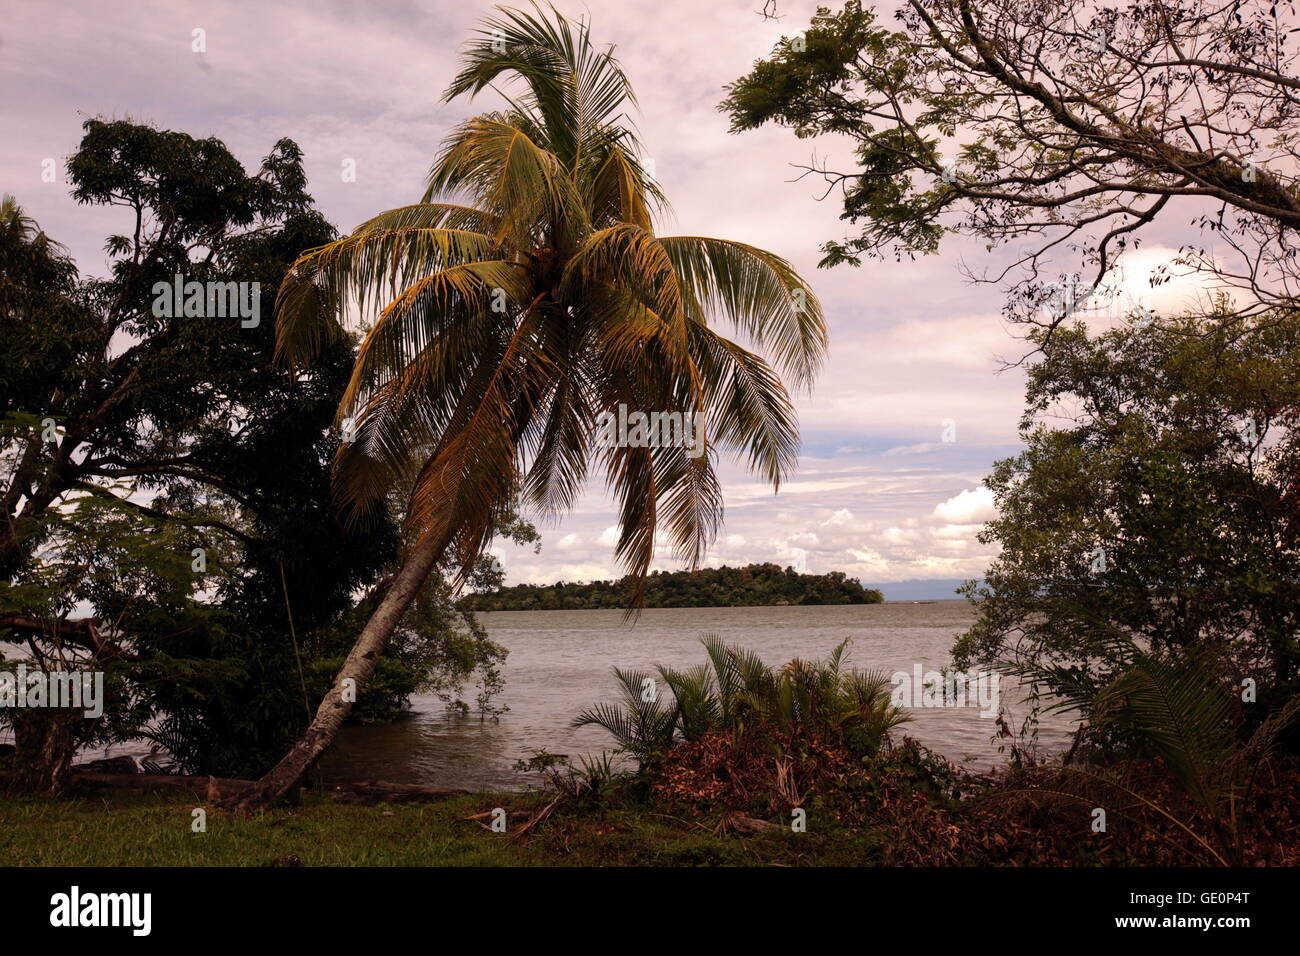 a Beach on the coast near the city of Bandar seri Begawan in the country of Brunei Darussalam on Borneo in Southeastasia. Stock Photo